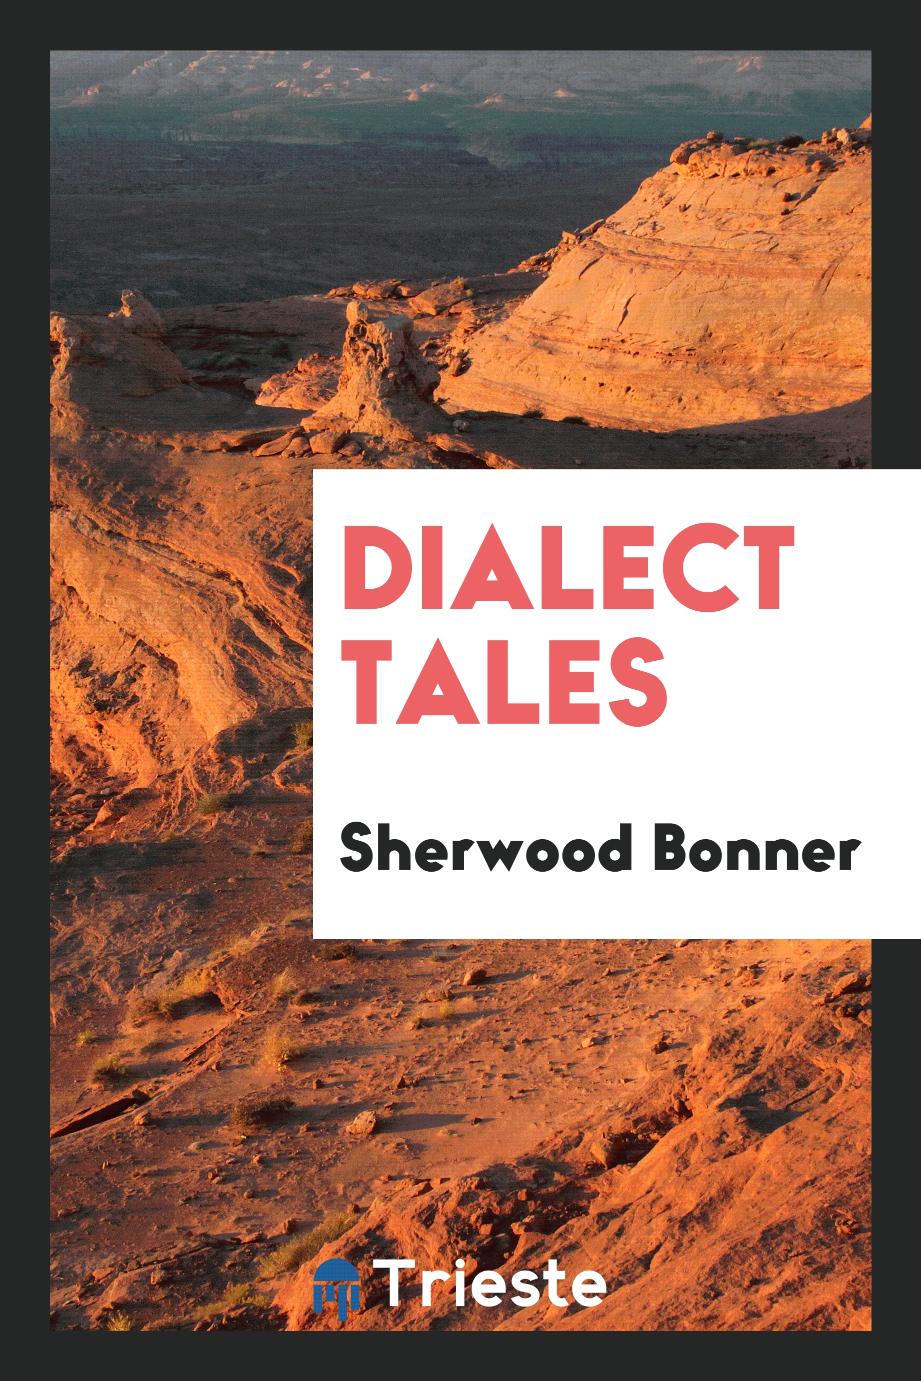 Dialect tales